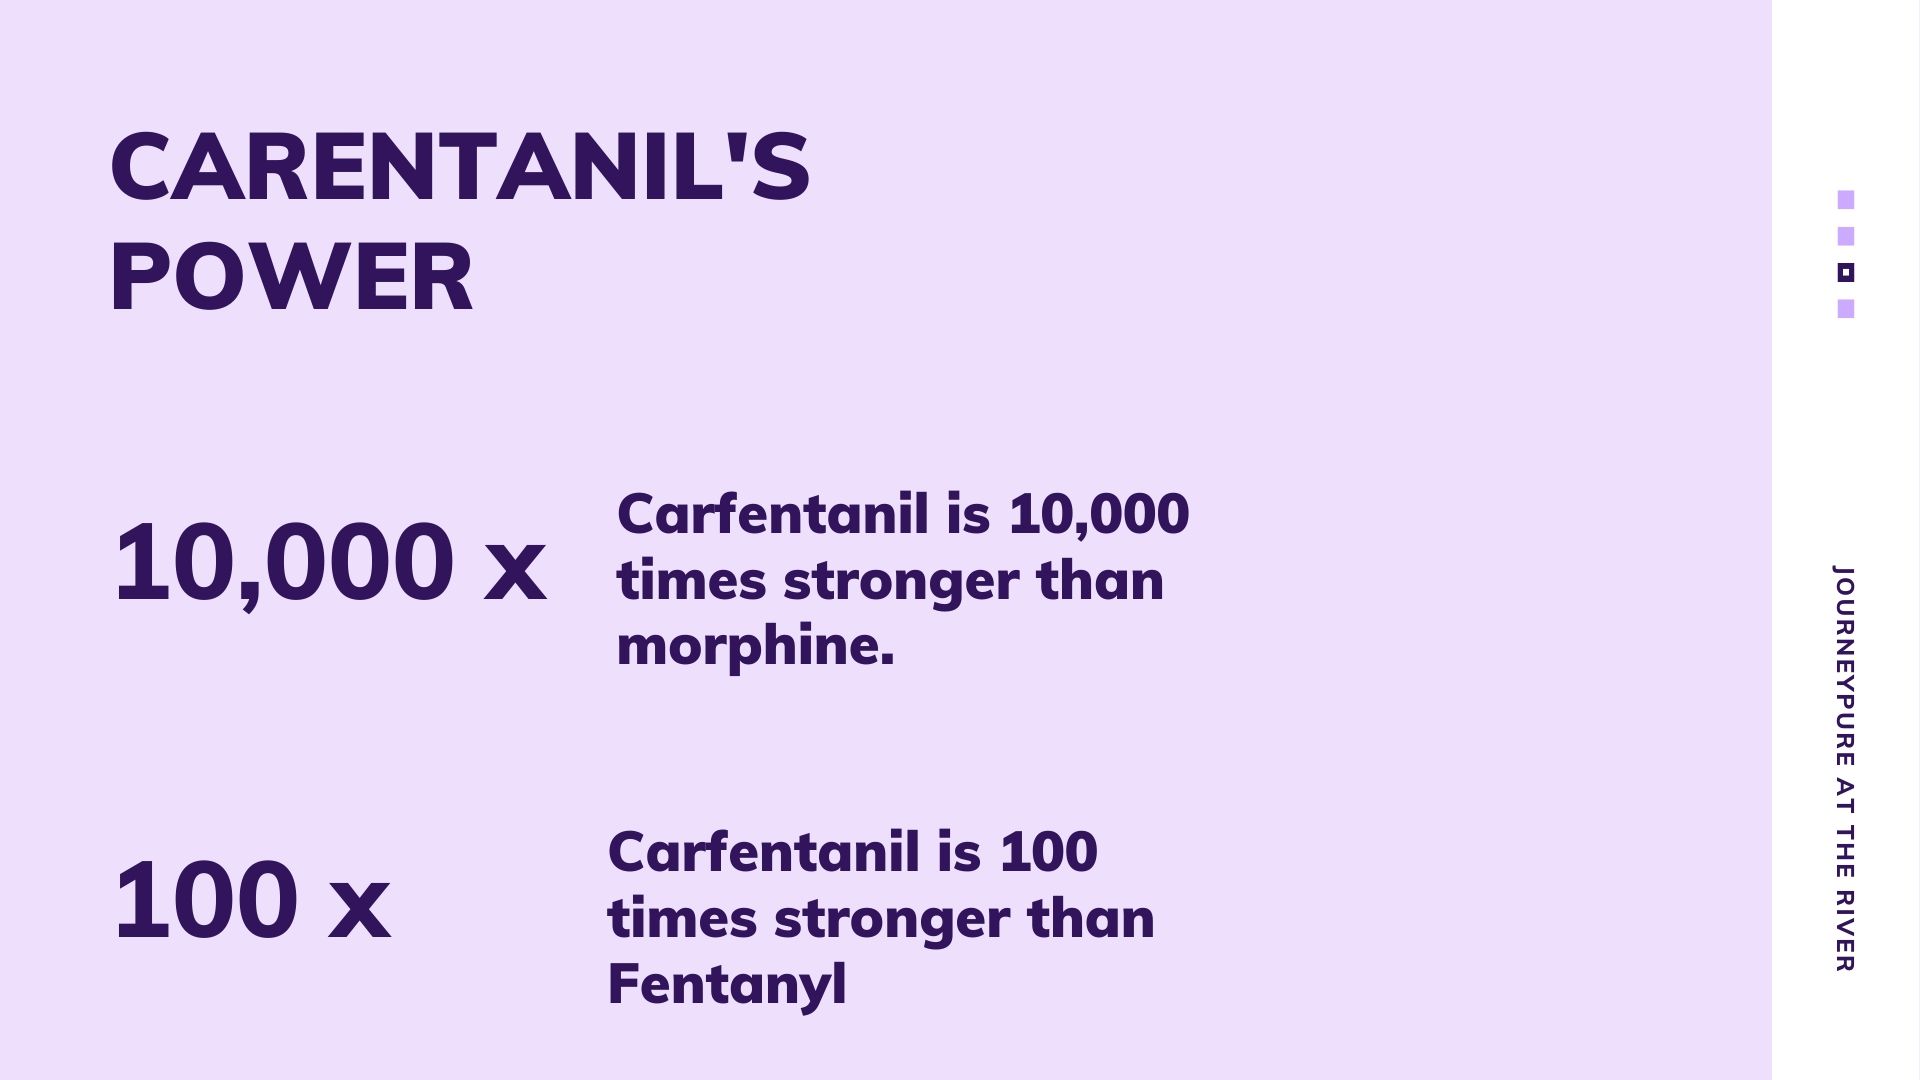 carfentanil is 10,000 times stronger than morphine